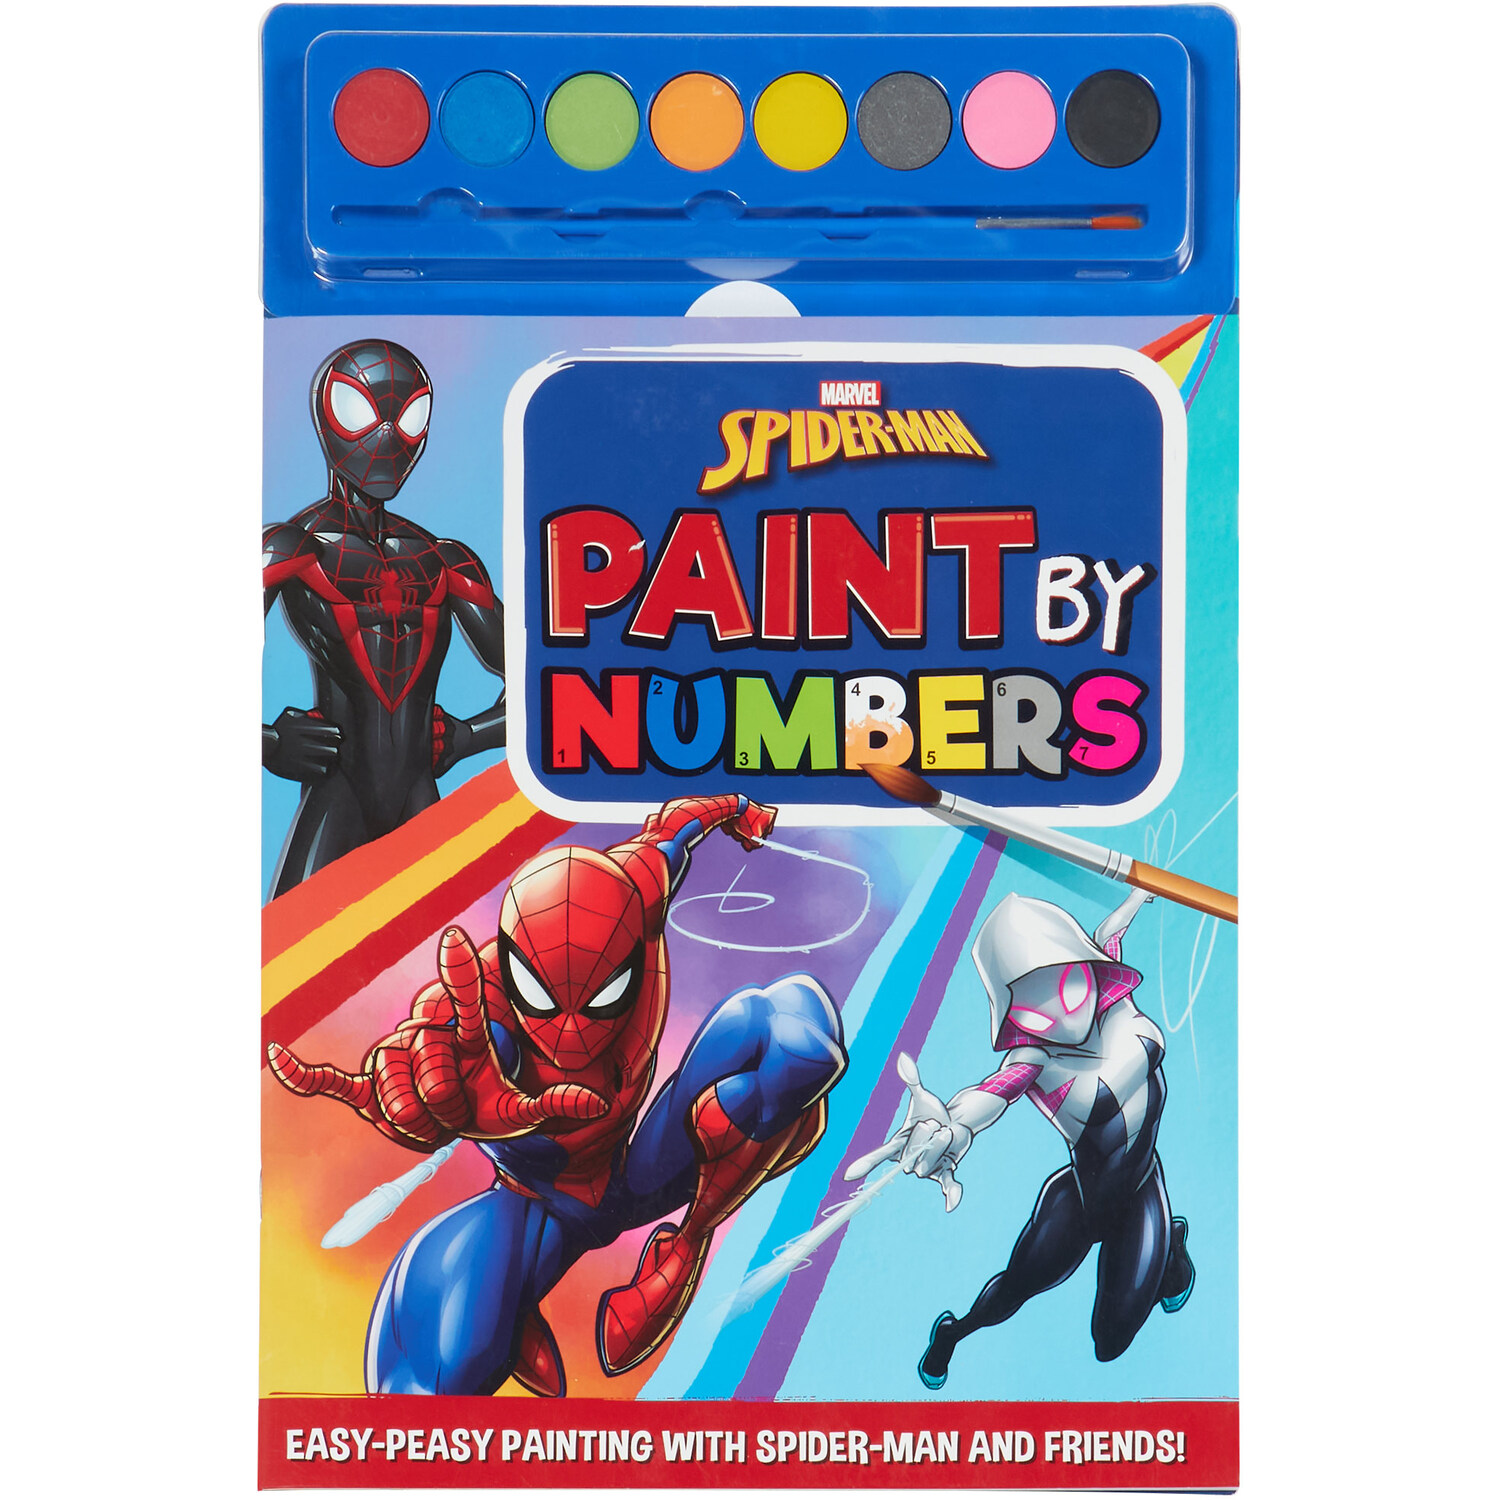 Paint by Numbers Book Image 2